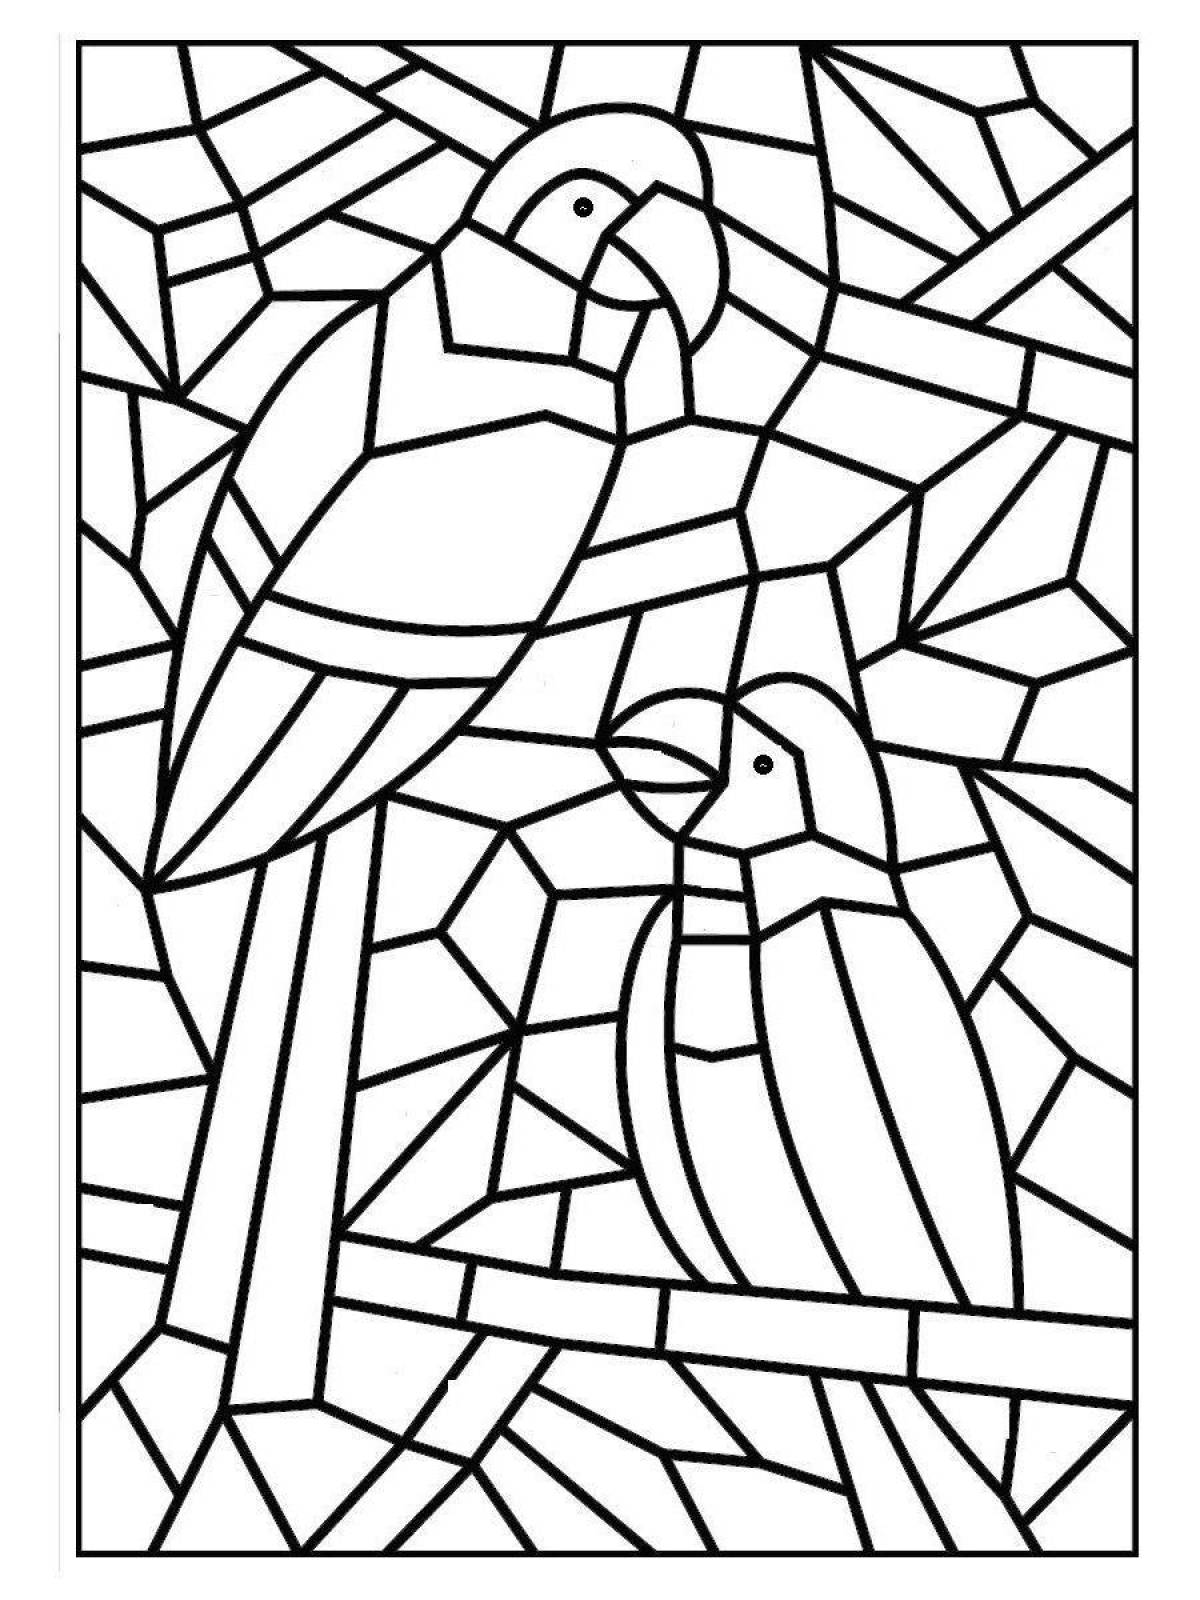 Great junior stained glass coloring page